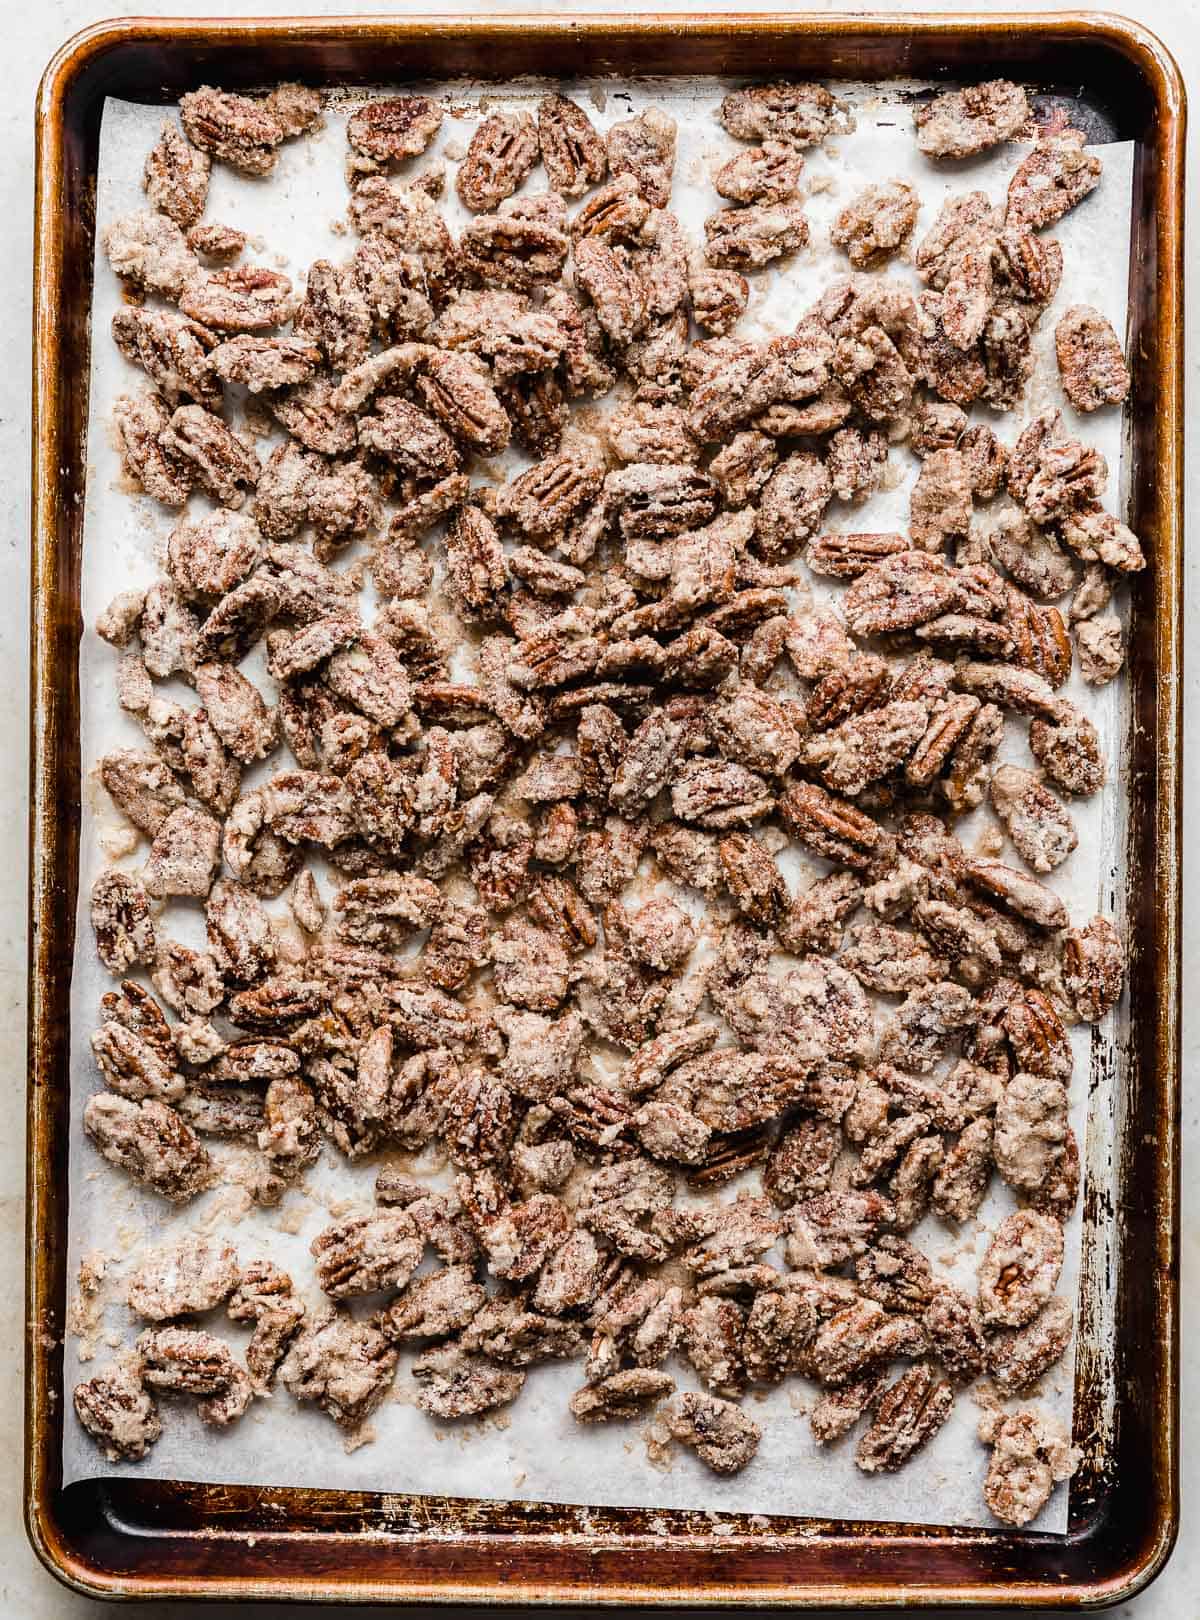 Baking sheet with Candied Pecans spread on it.